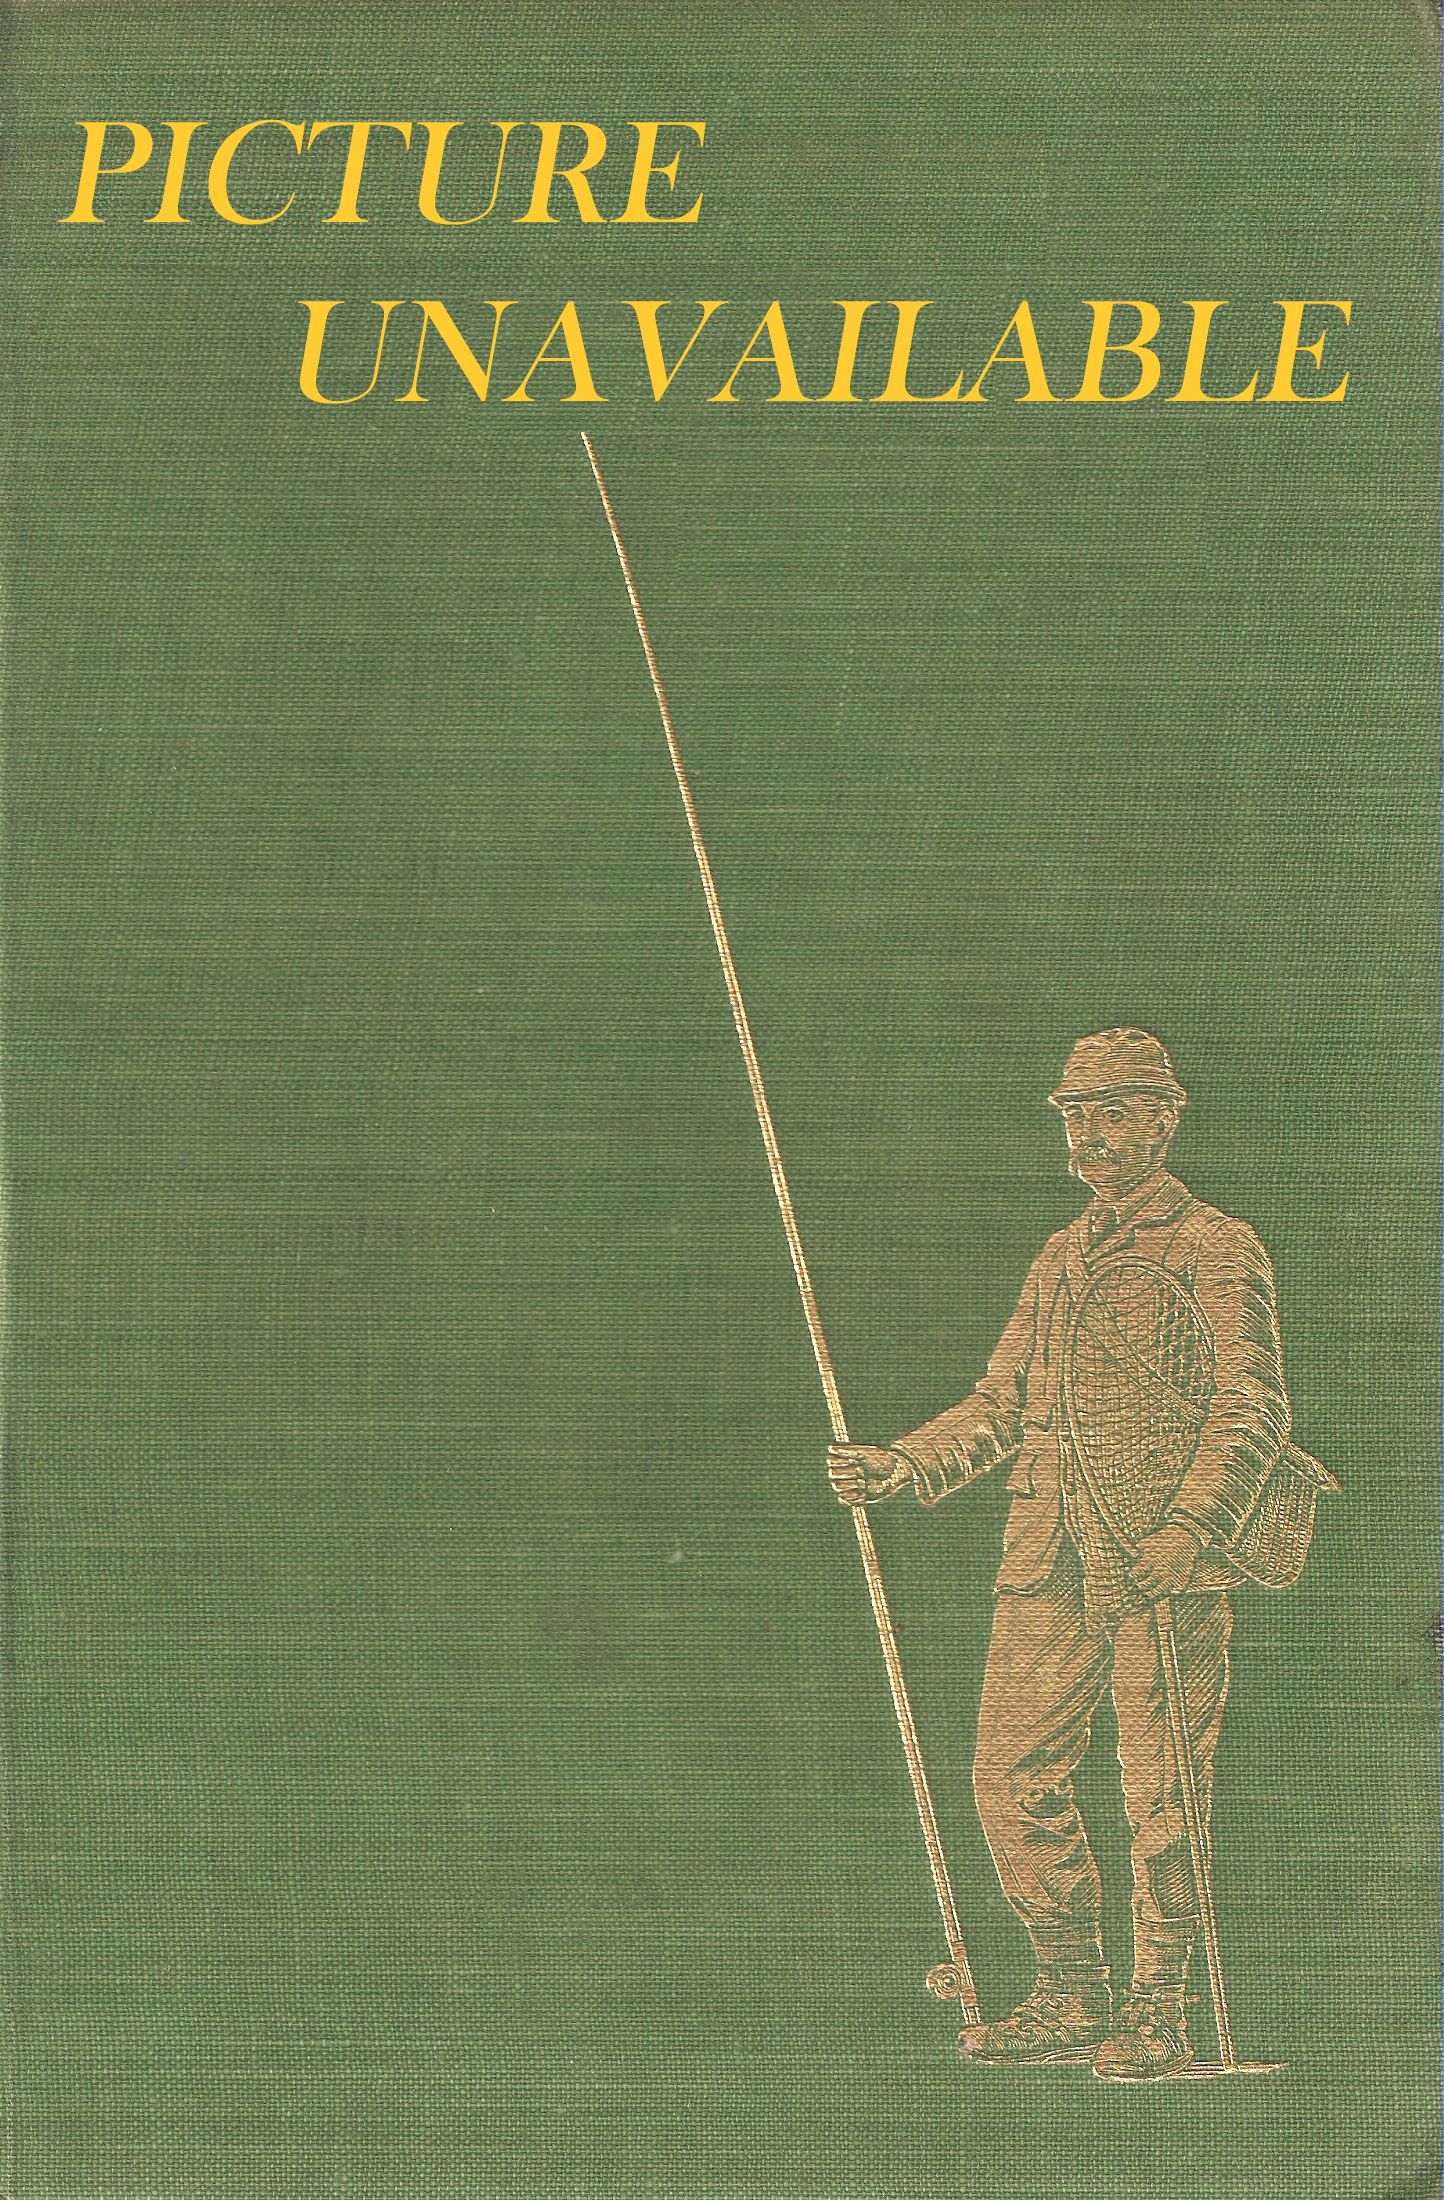 CREEL: A FISHING MAGAZINE. Volume 3, number 1. July 1965.